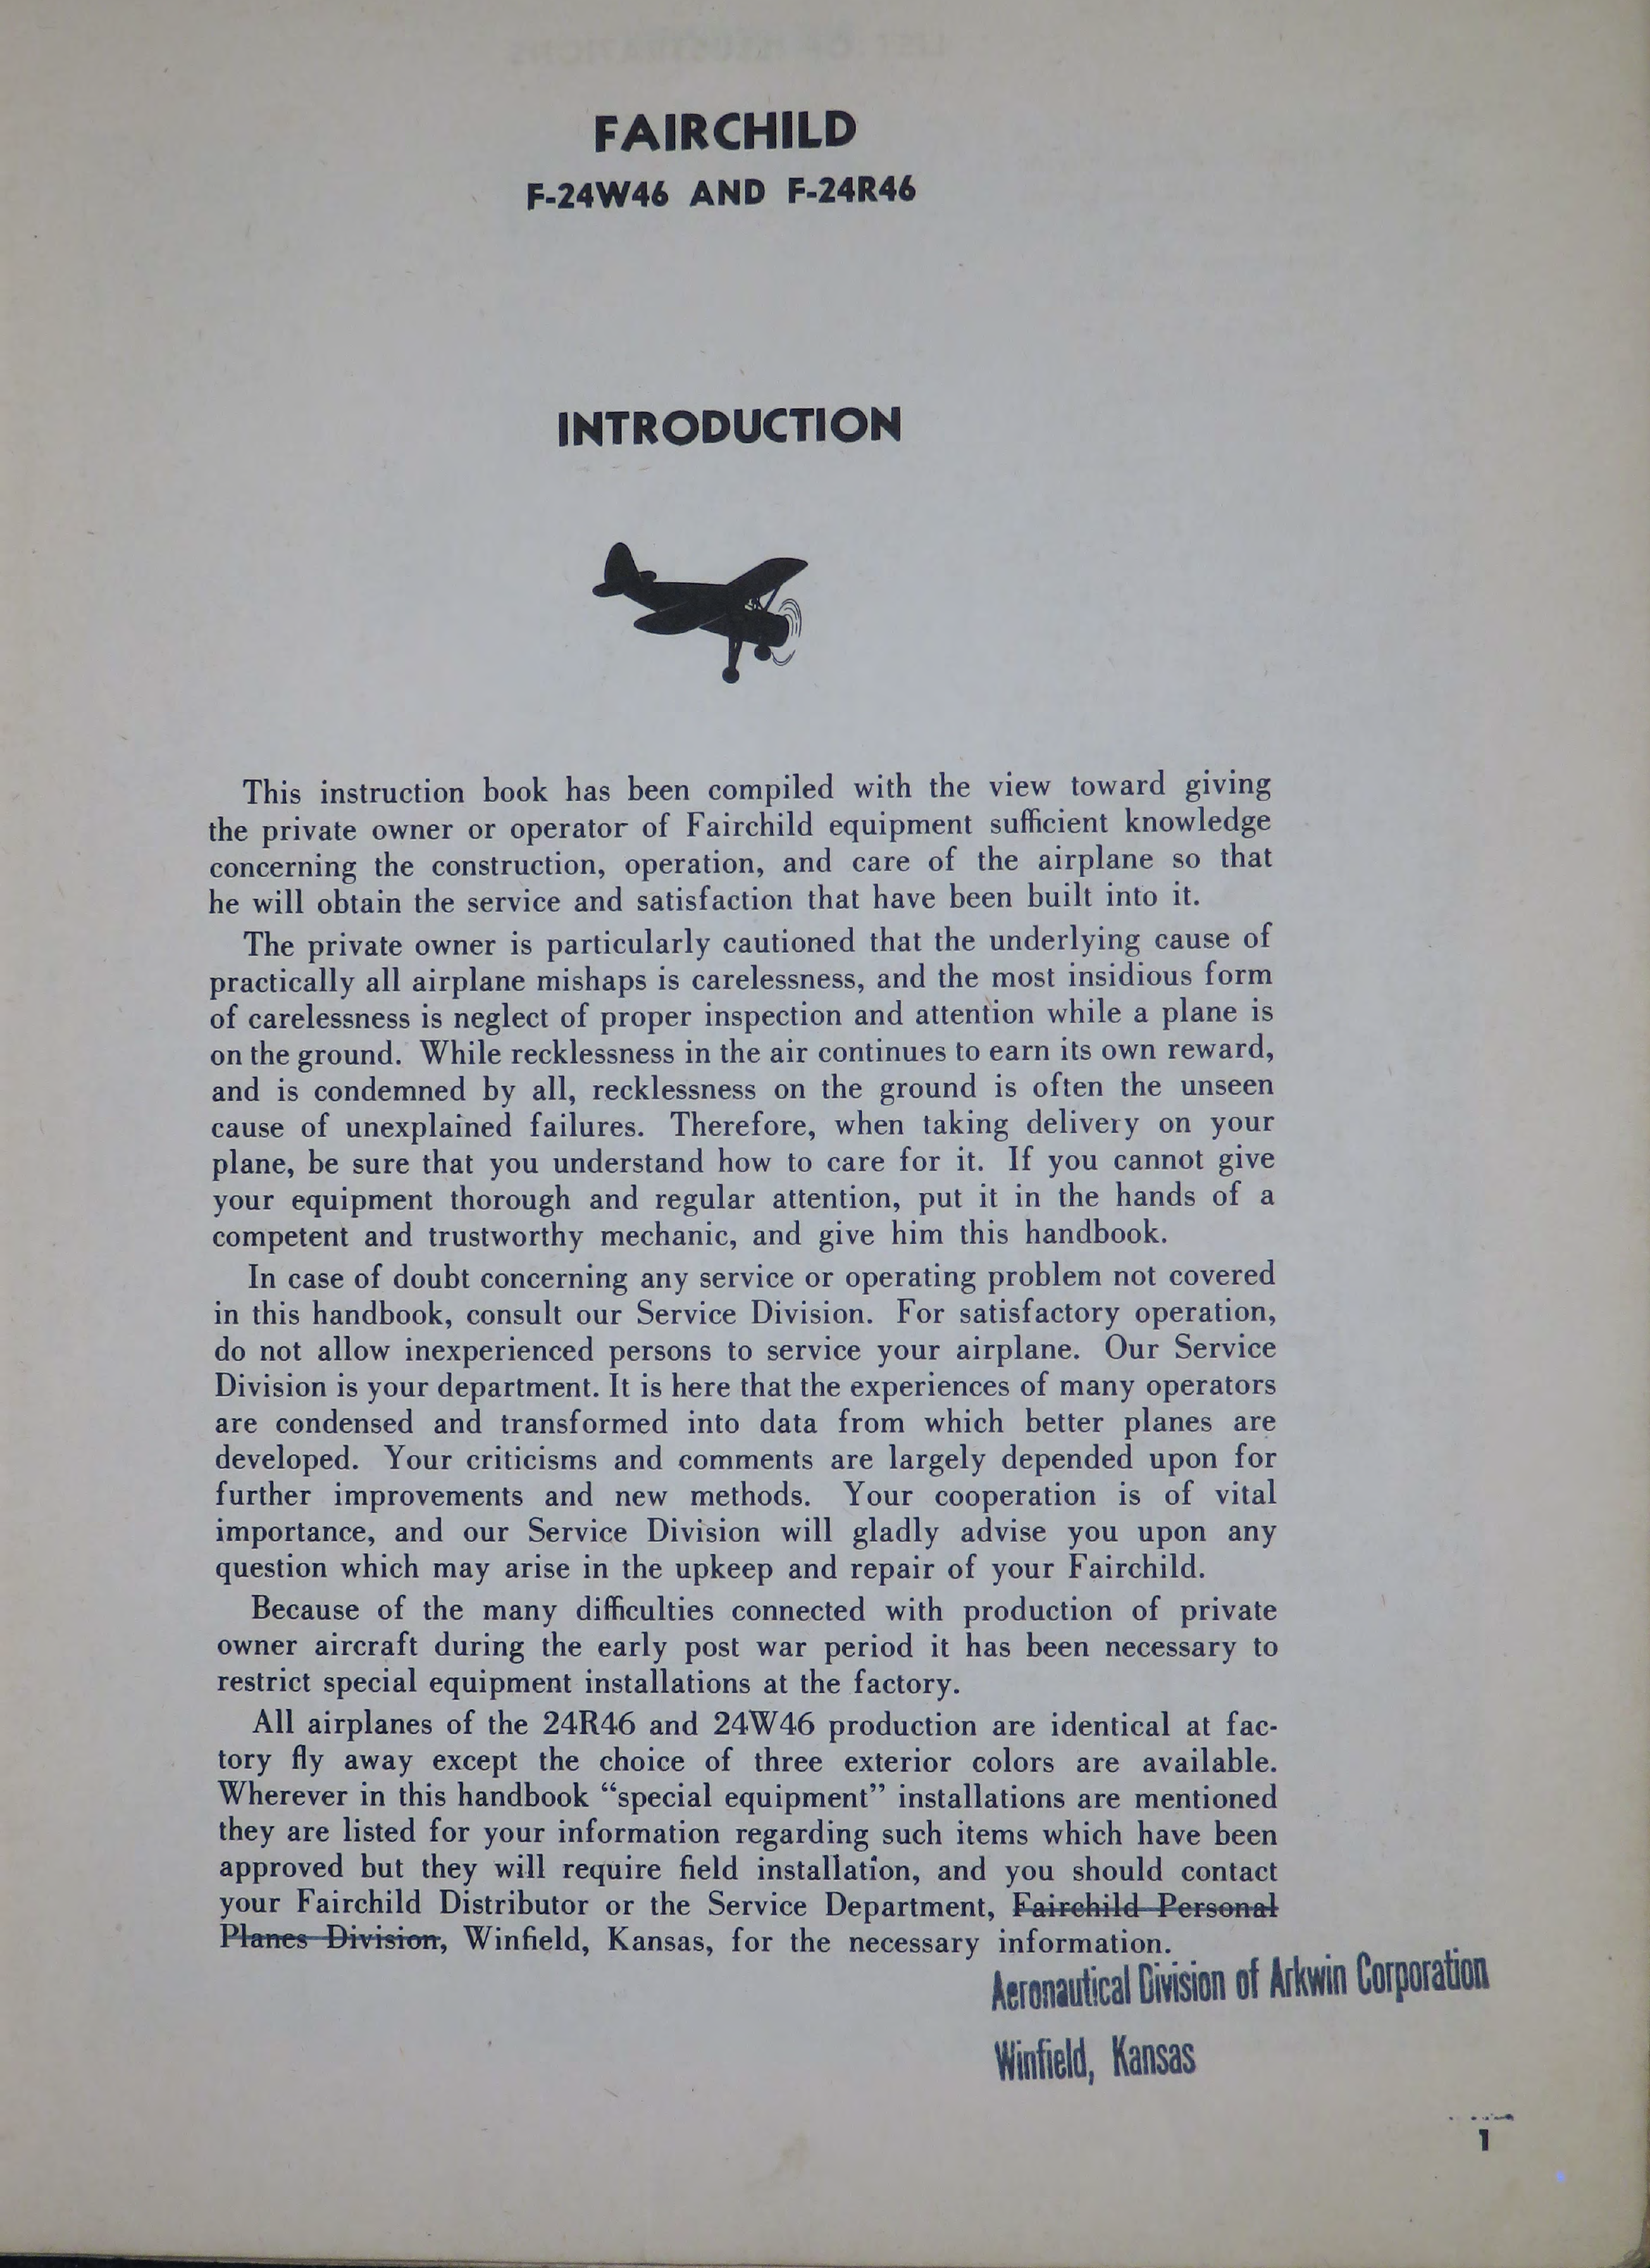 Sample page 5 from AirCorps Library document: Operation, Erection & Maintenance for Fairchild F-24W46 & F-24R46